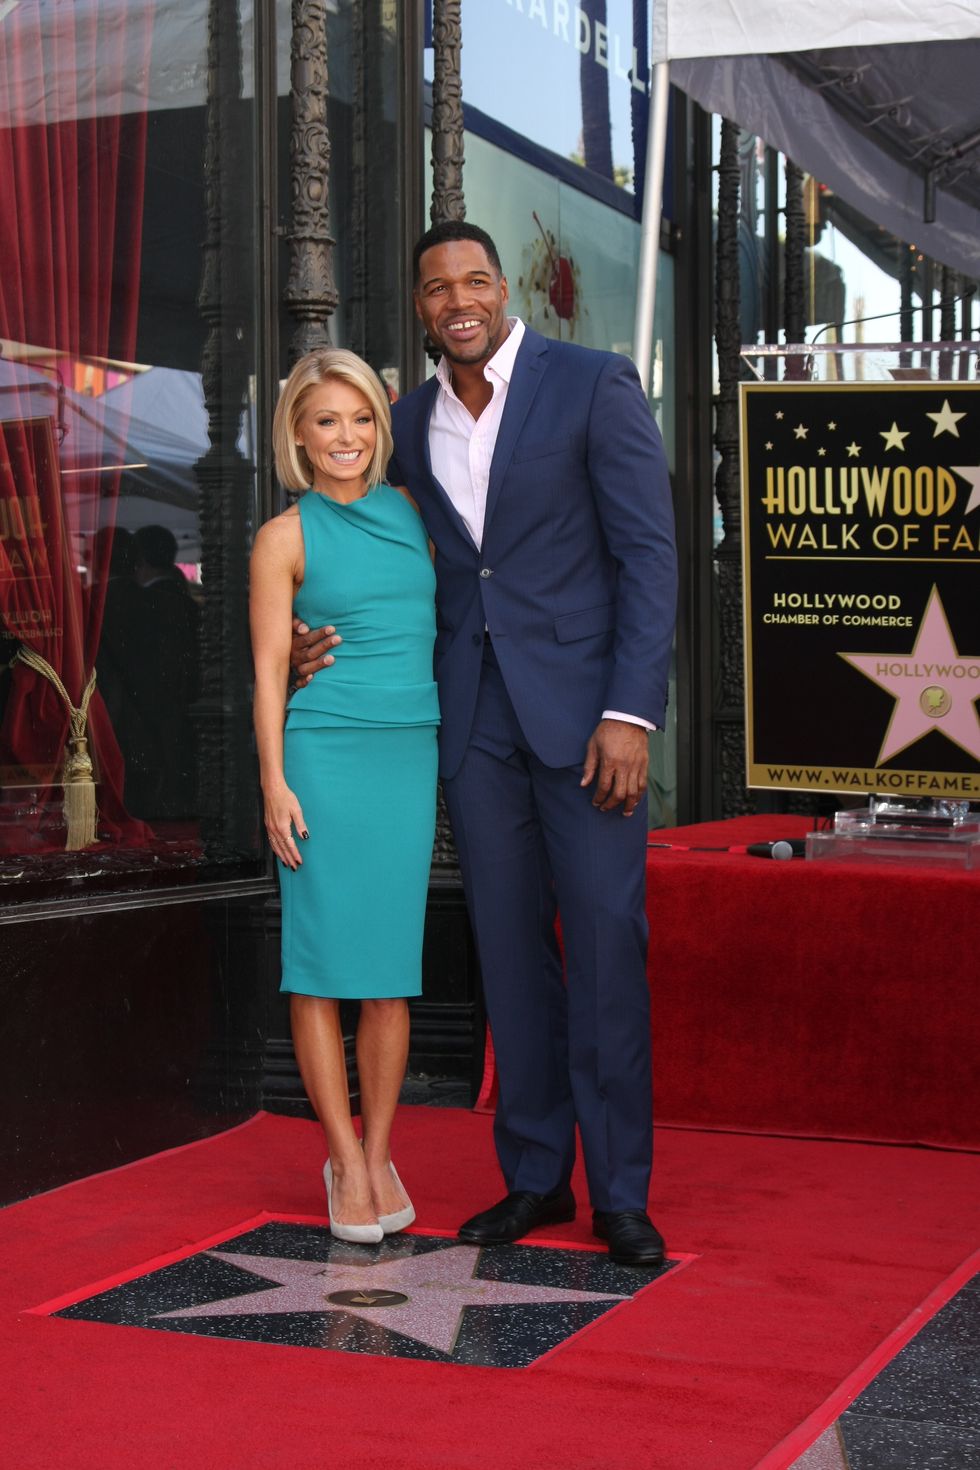 If You Boycotted Work Like Kelly Ripa, What Would Happen?